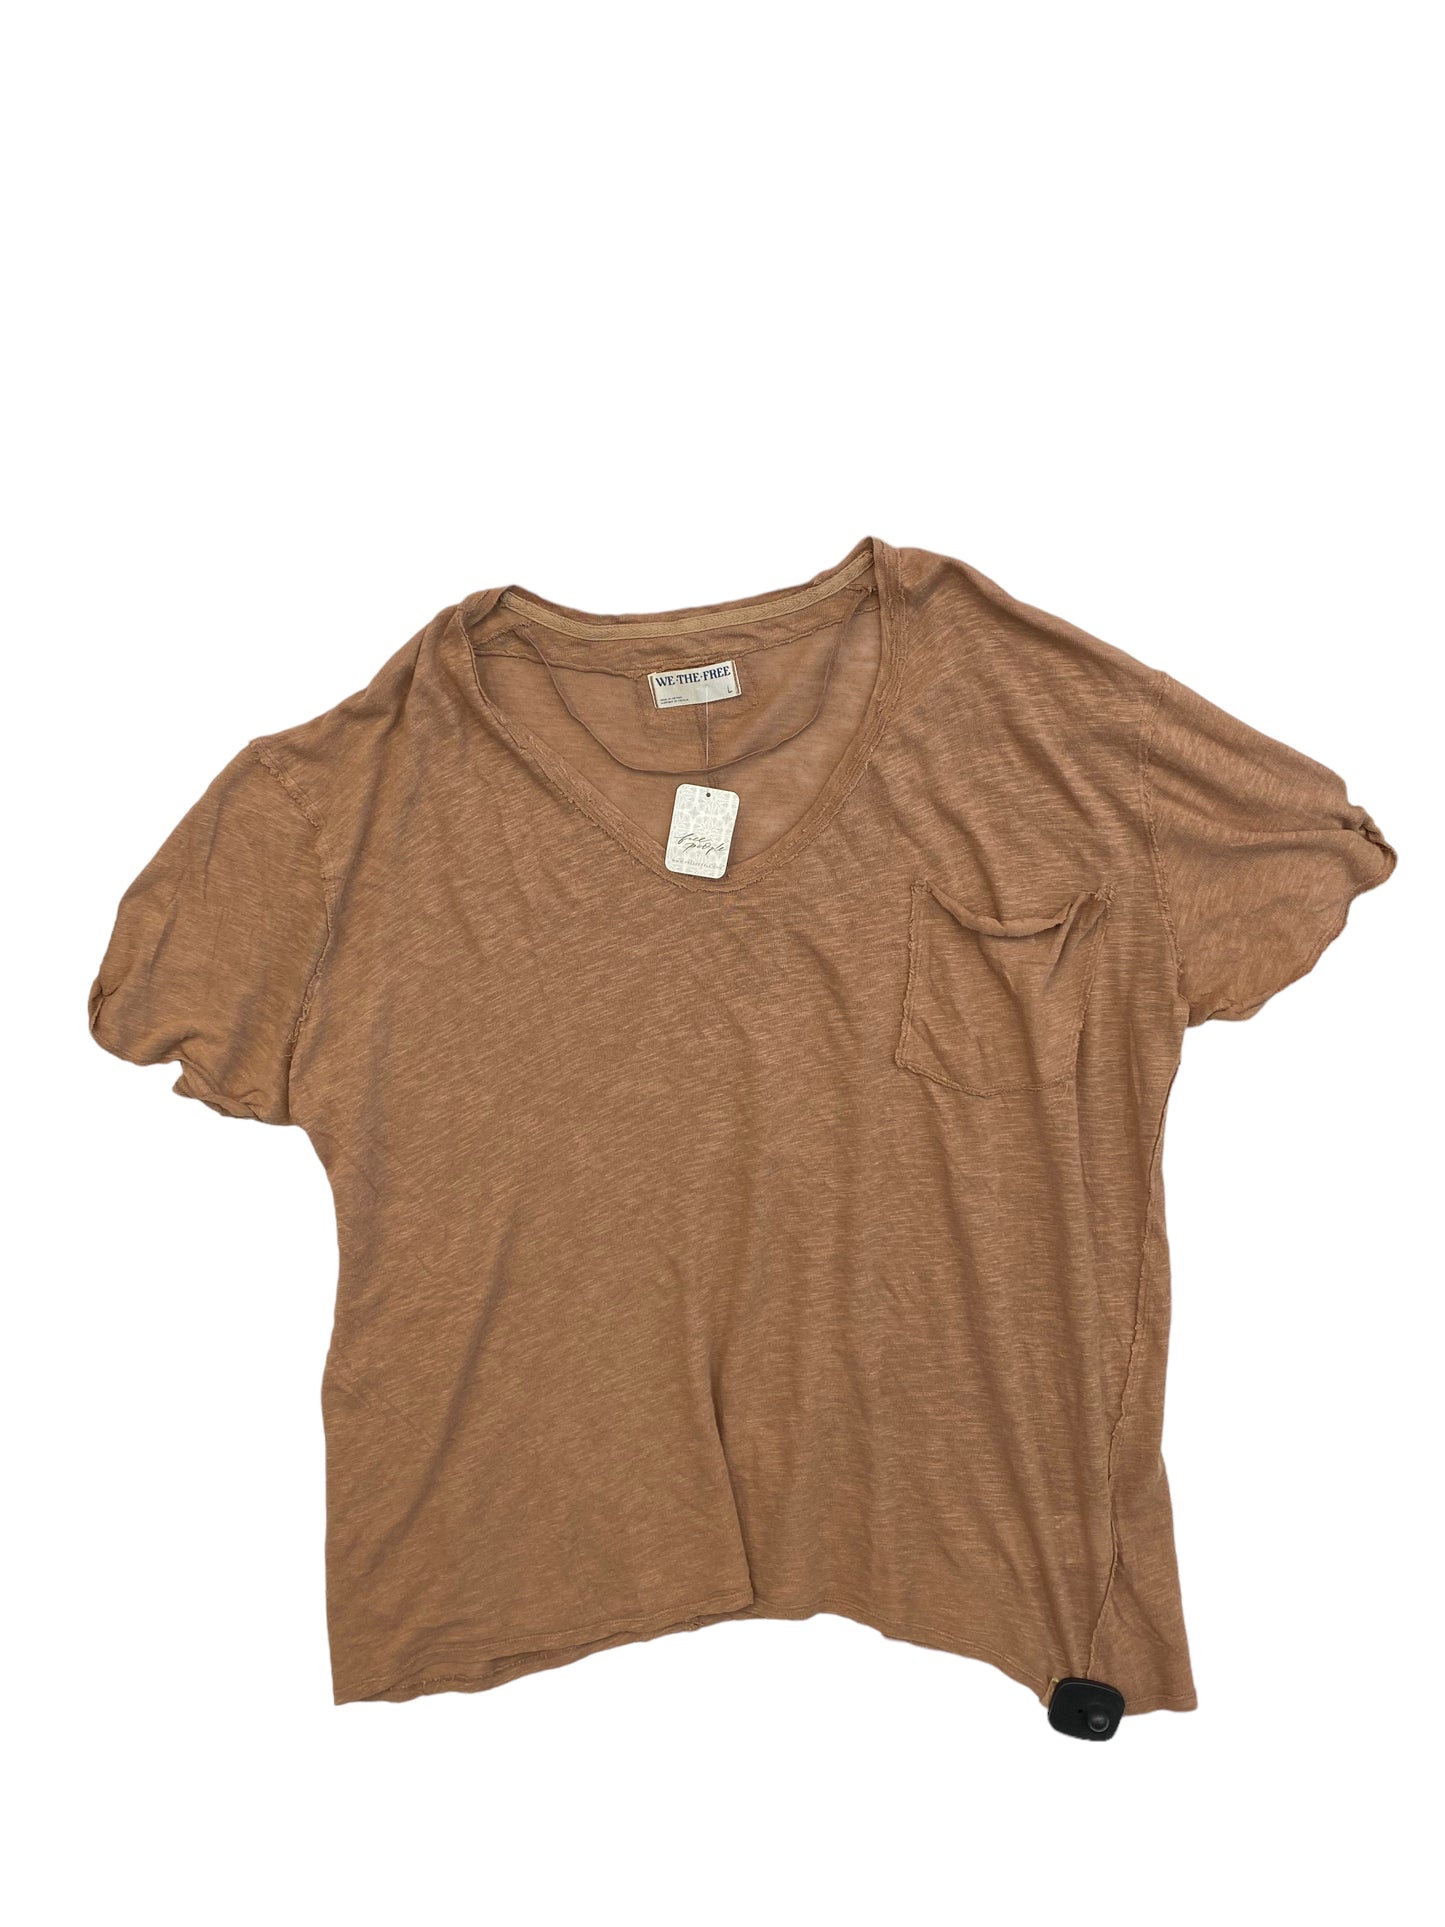 Brown Top Short Sleeve We The Free, Size L